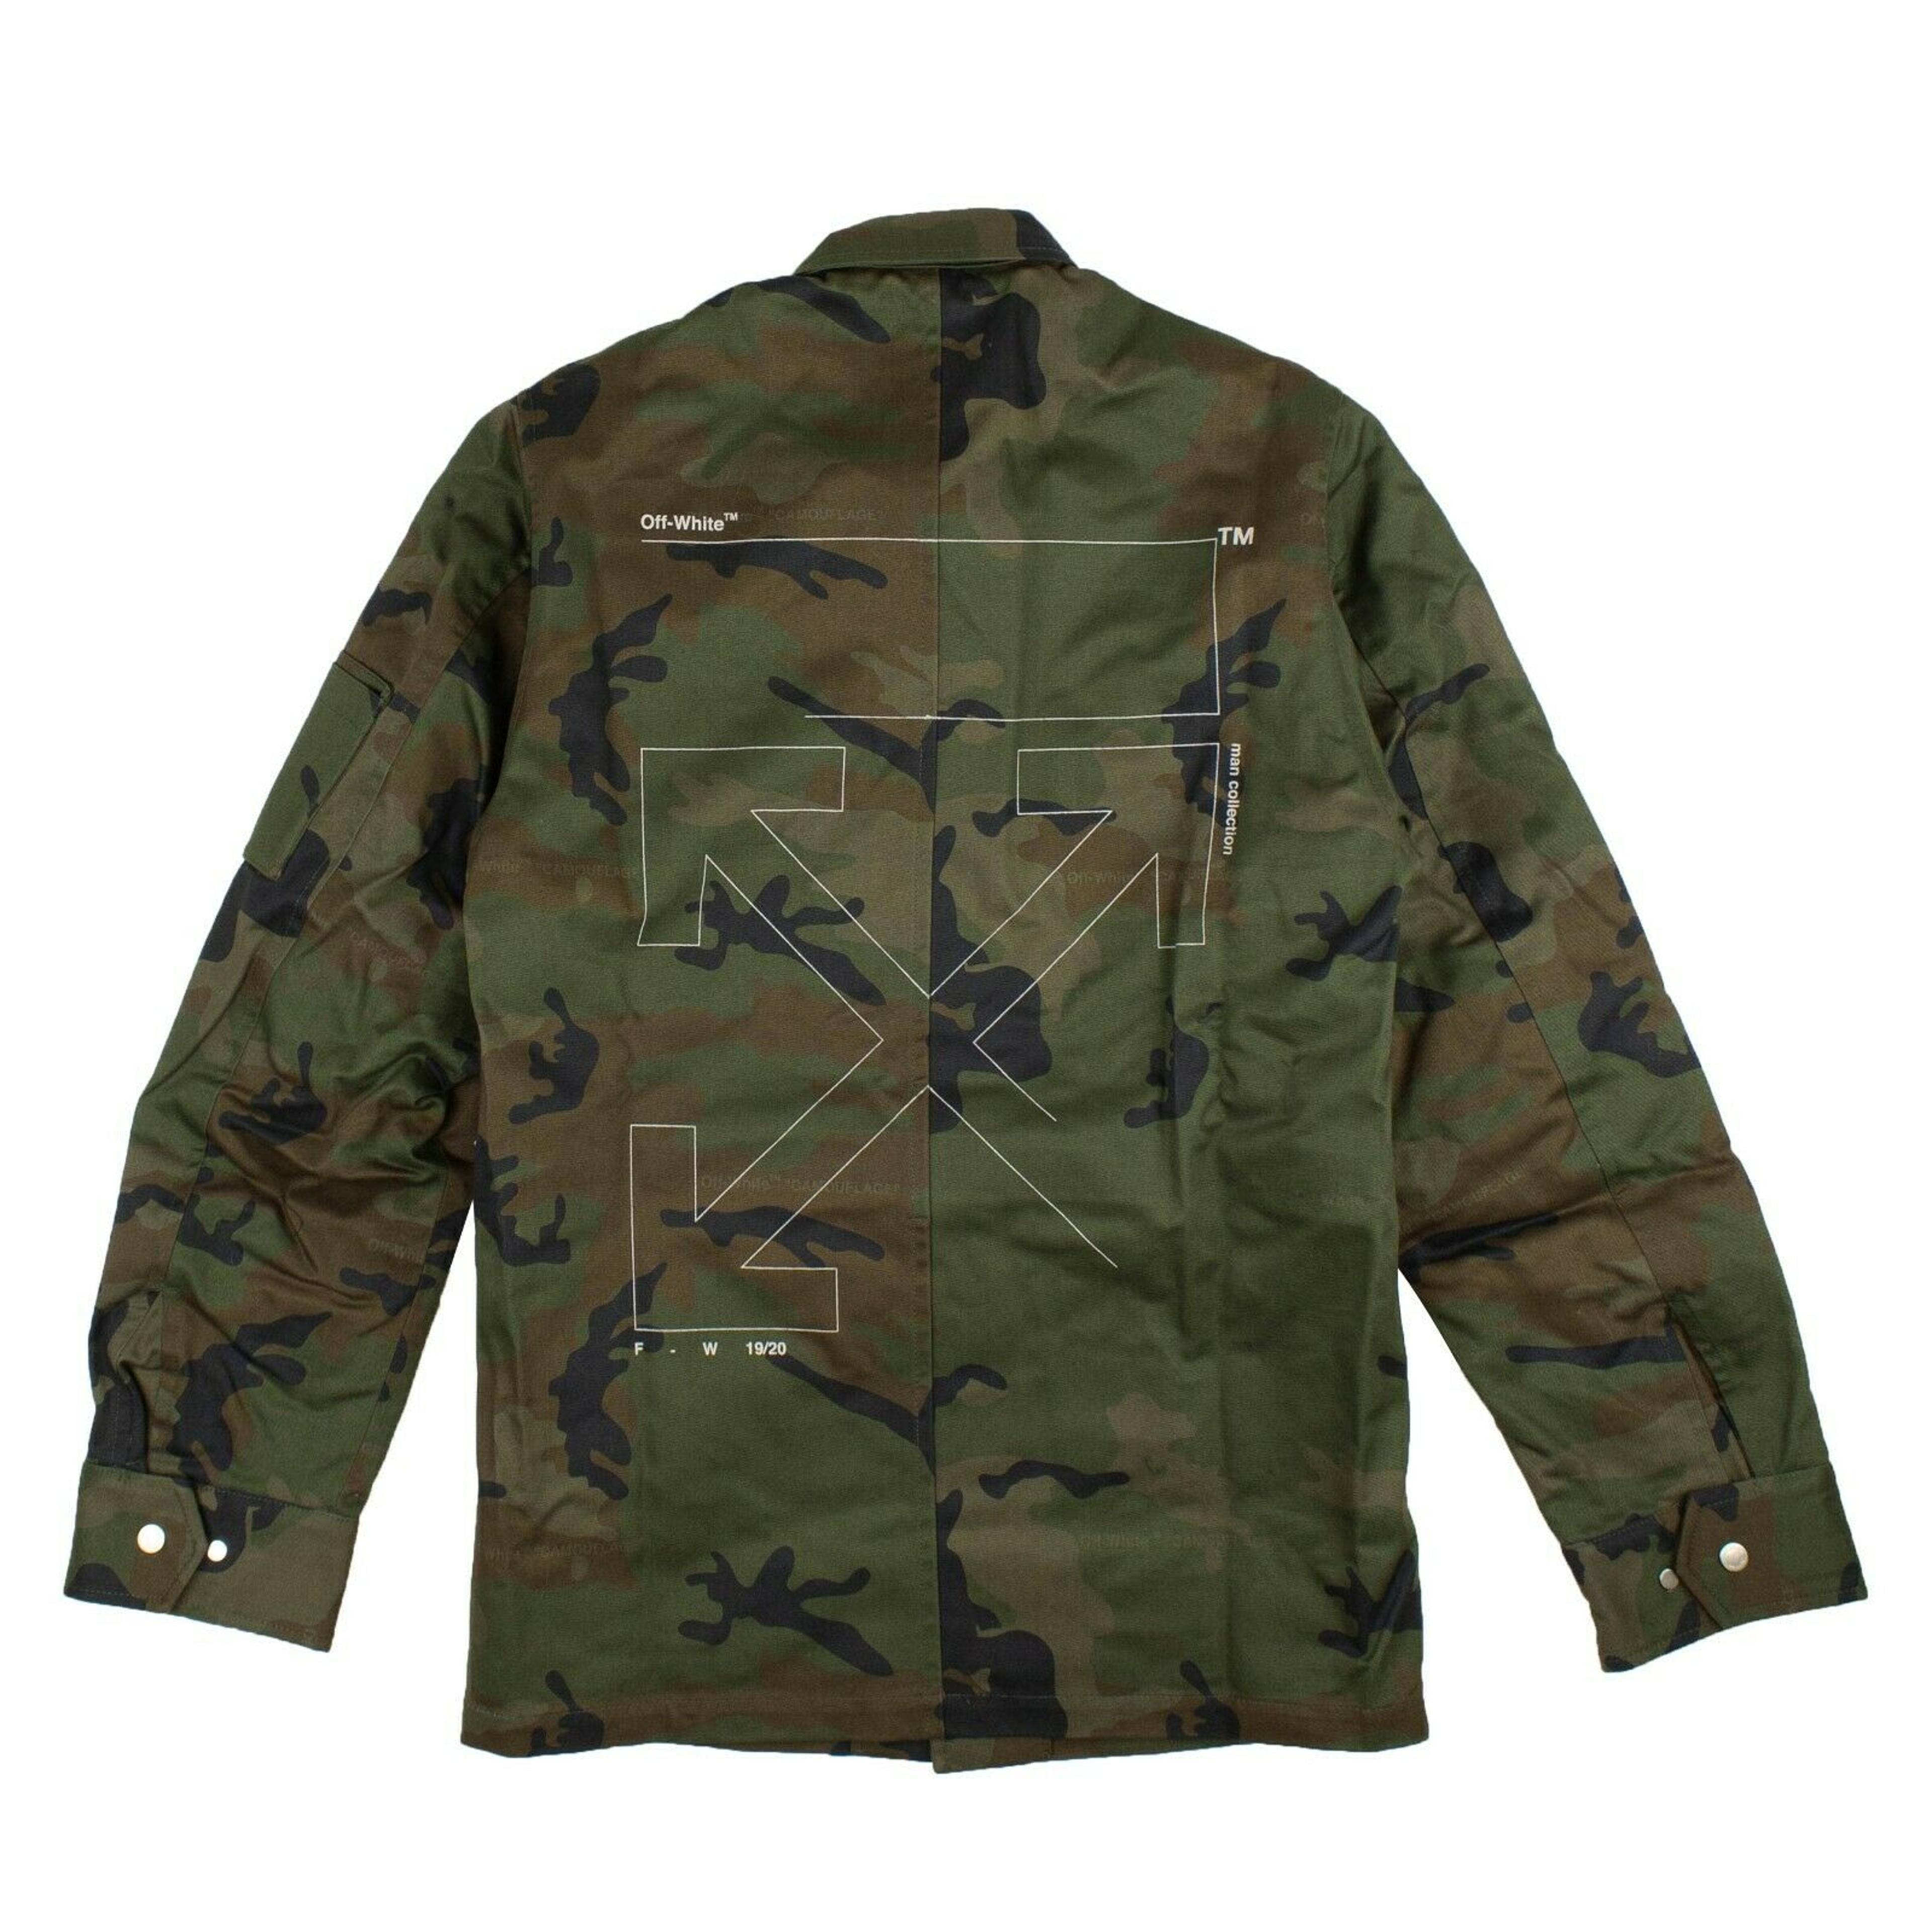 Alternate View 1 of Green Camouflage Field Jacket